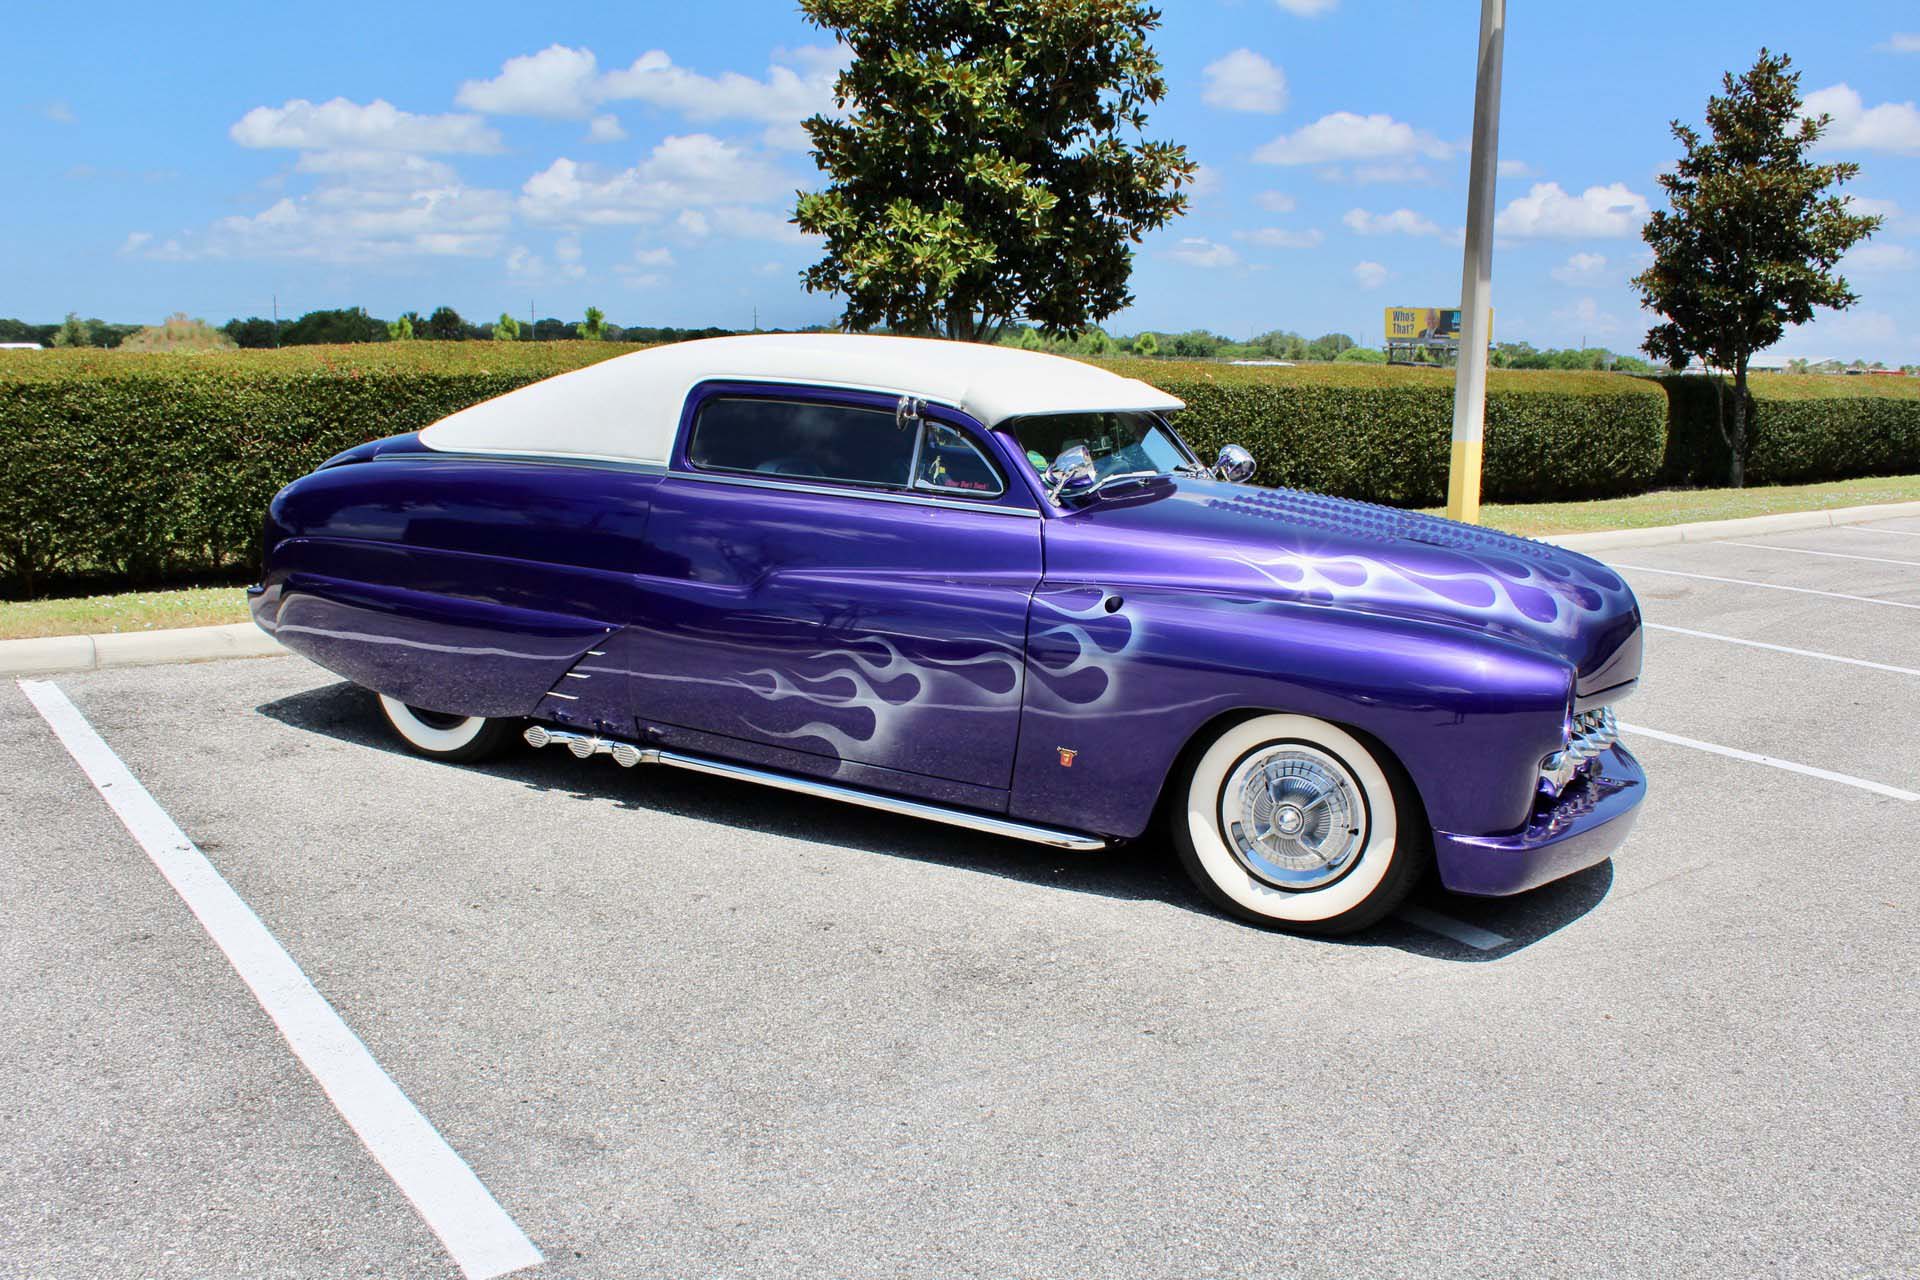 Show Off In This Custom 1950 Mercury Lead Sled